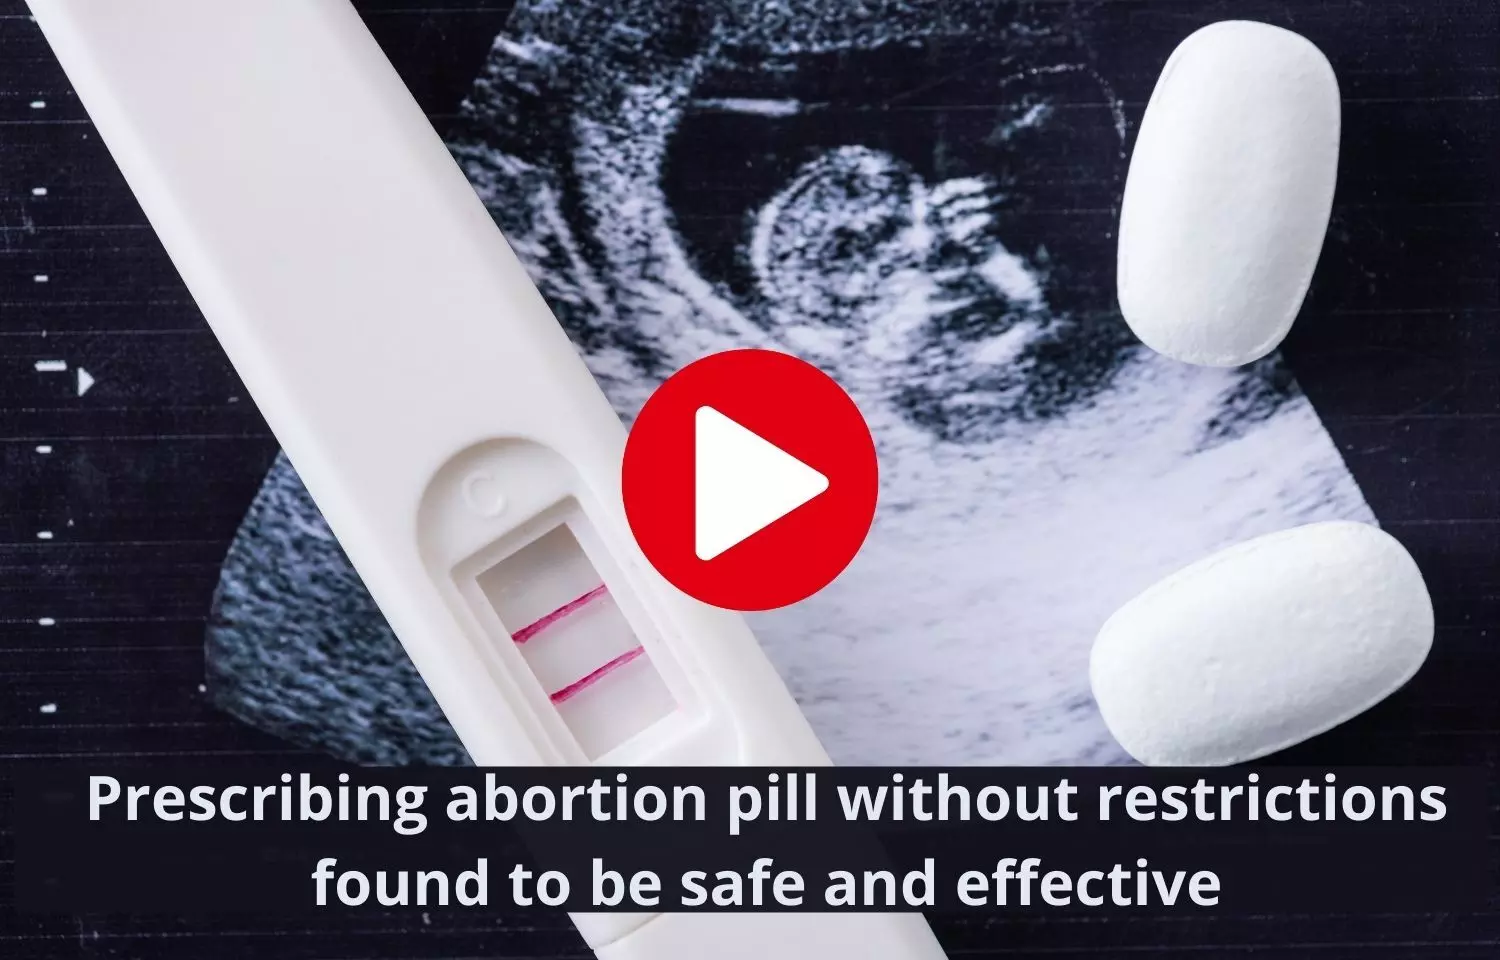 Abortion pill prescriptions found to be safe and effective